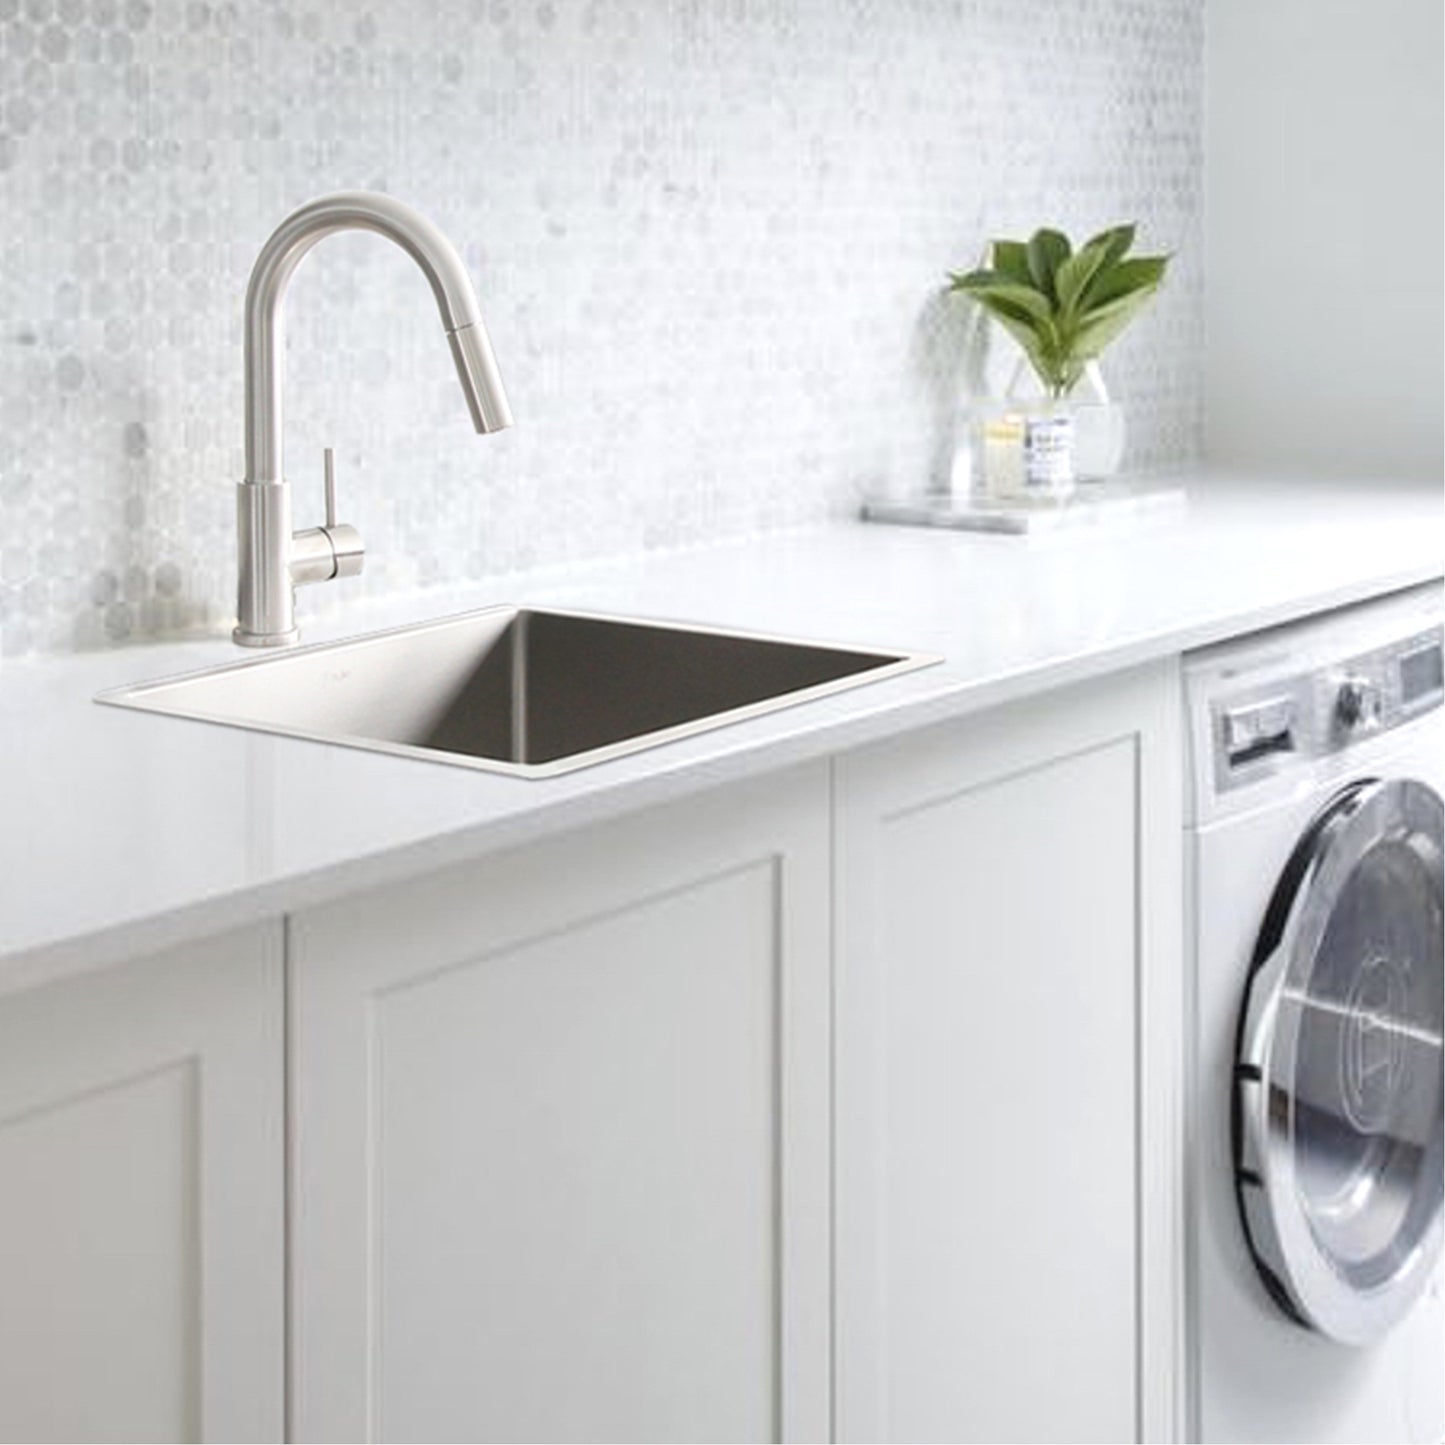 STYLISH 22" x 18" Spinel Single Bowl Undermount and Drop-in Stainless Steel Laundry Sink S-320T